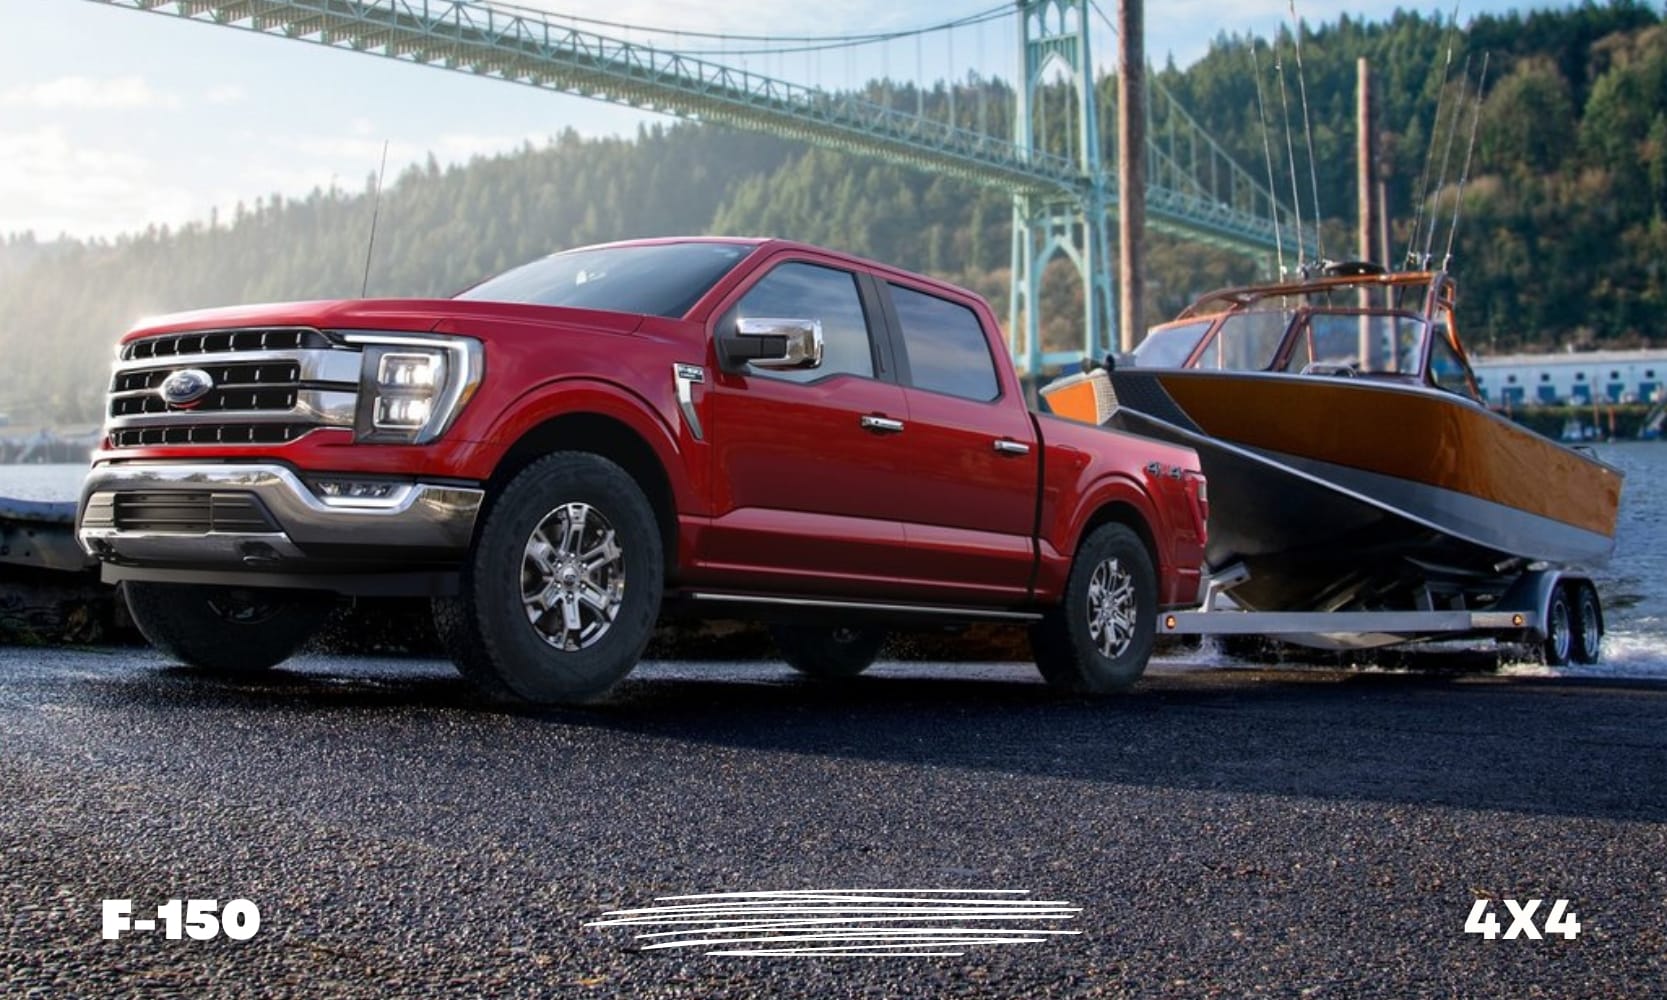 a red used Ford F-150 4x4 truck towing a boat out of the off-ramp loading dock at a river bank